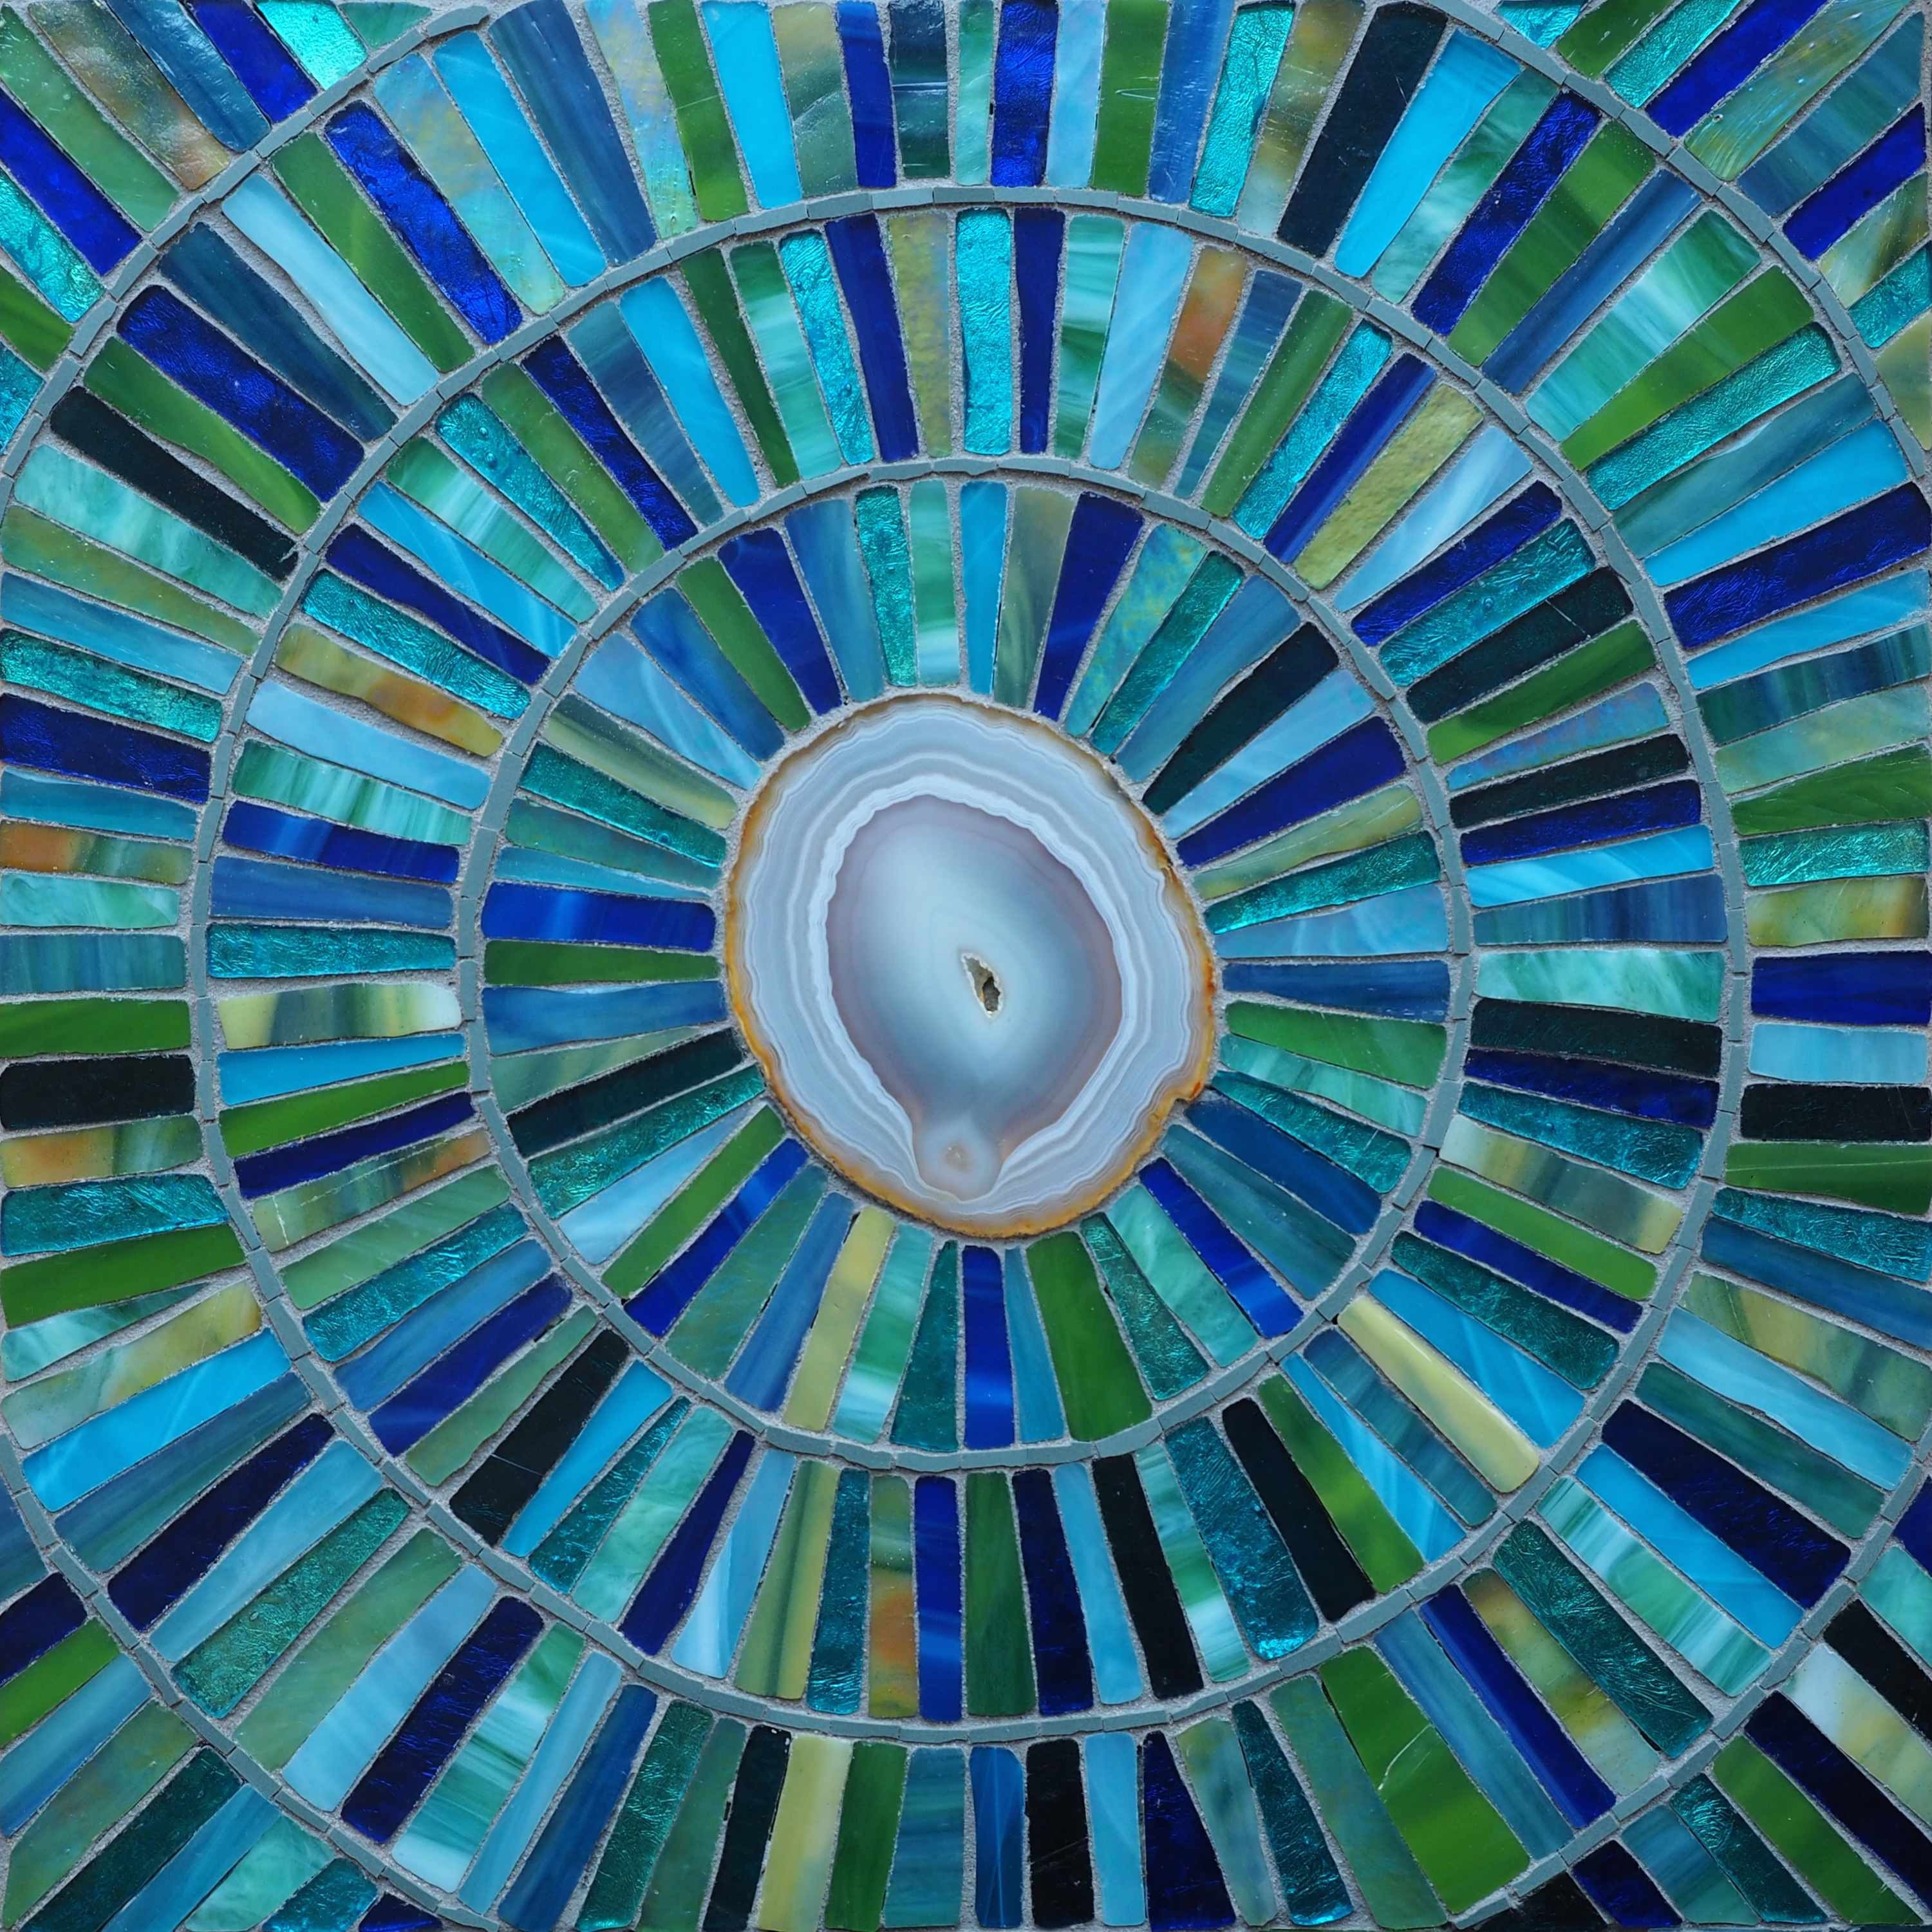 Framed Stained Glass Mosaic - Siobhan Allen